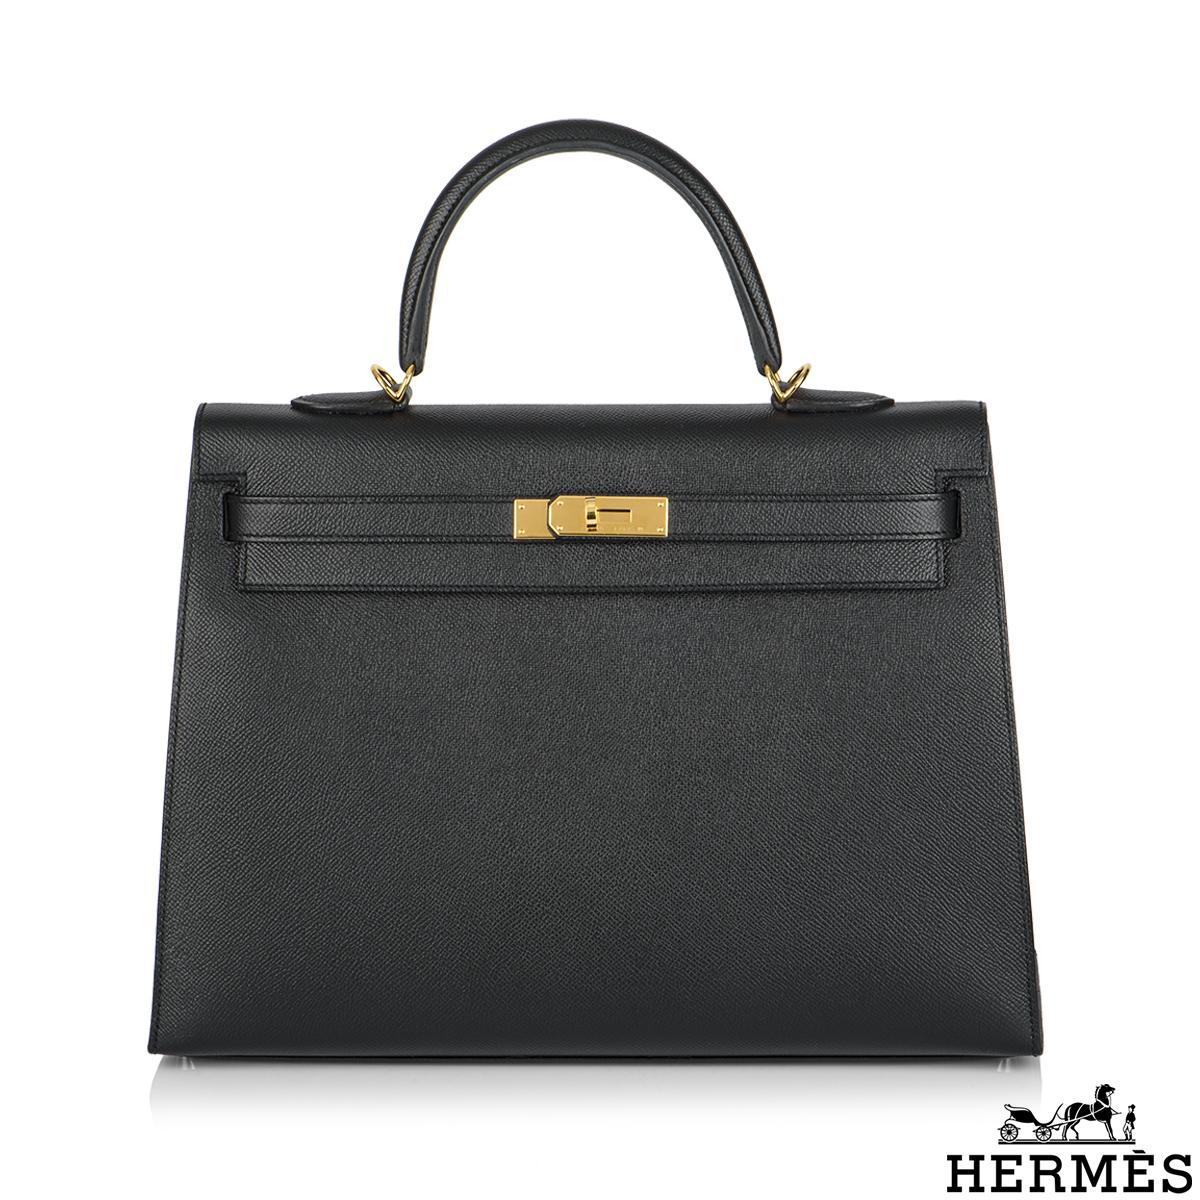 A gorgeous Hermès Kelly 35cm bag. The exterior of this Special Order Kelly features a sellier style in noir black veau epsom leather. The noir leather is complemented with gold hardware and tonal stitching. It features a front toggle closure with